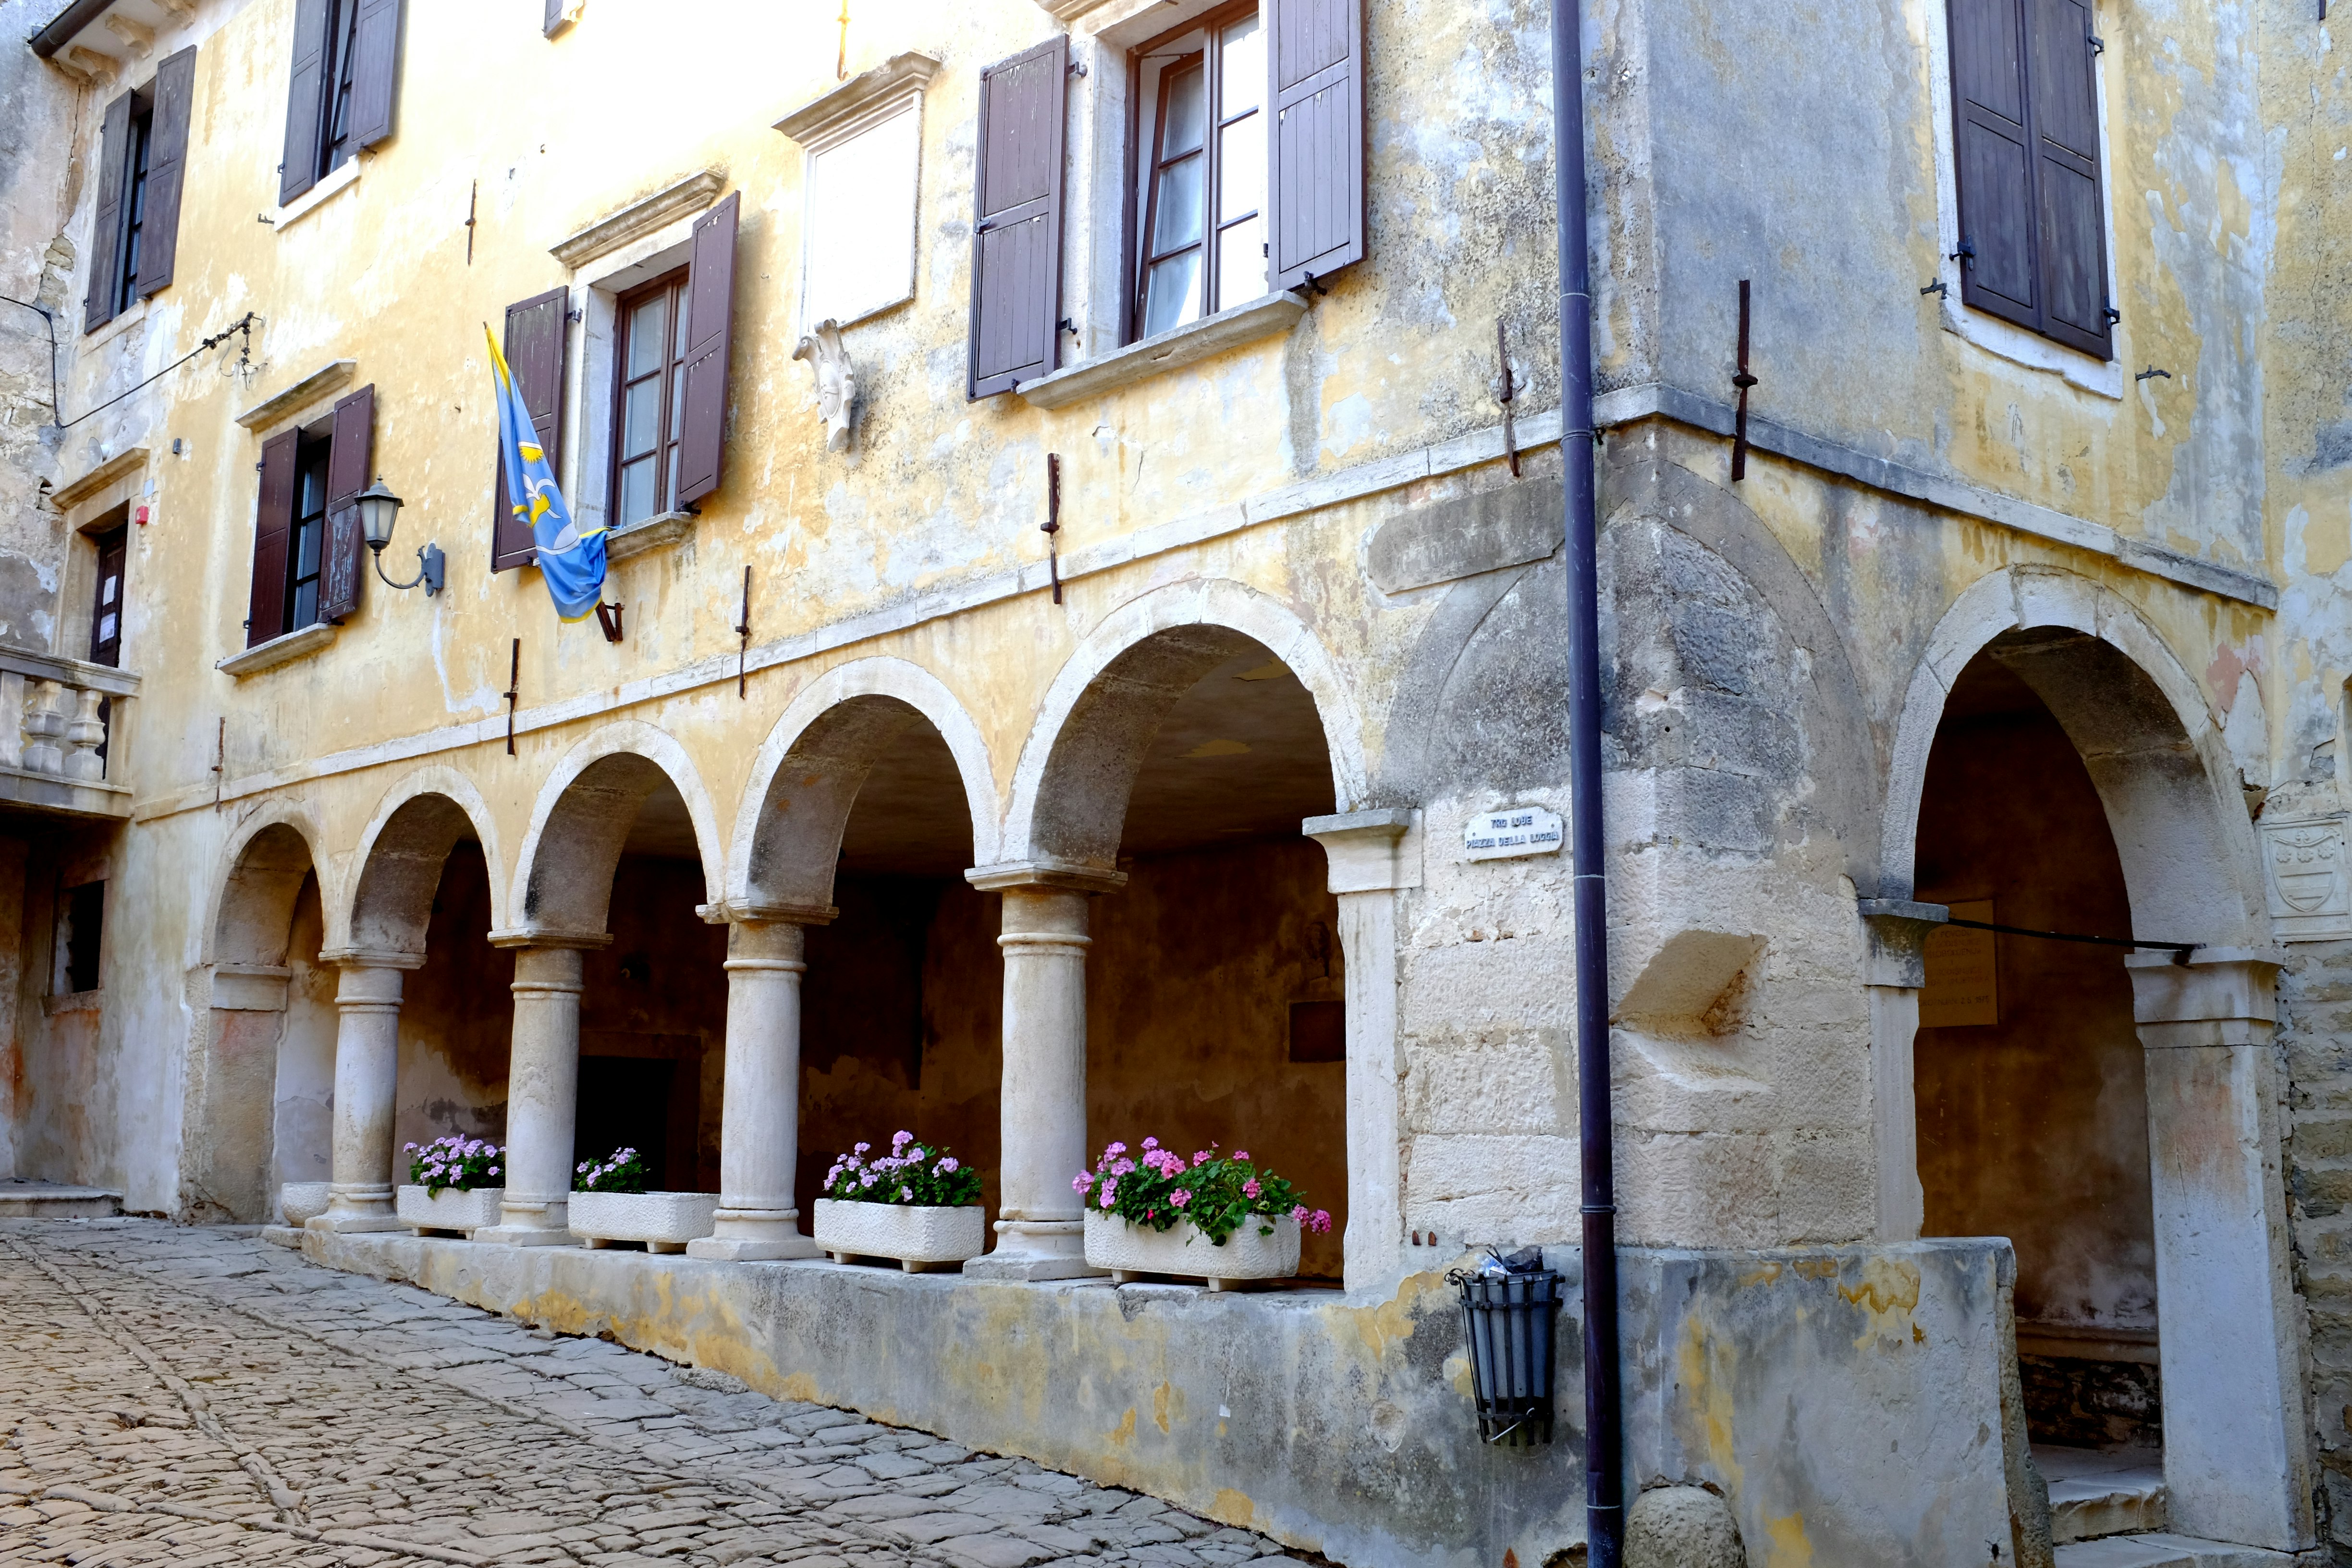 The weathered grey and yellow exterior of one of the loggias in Groznjan on the Croatian border feature window boxes with pink flowers in the archways just above street level, brown shuttered windows, and a blue and yellow flag twisted around the pole